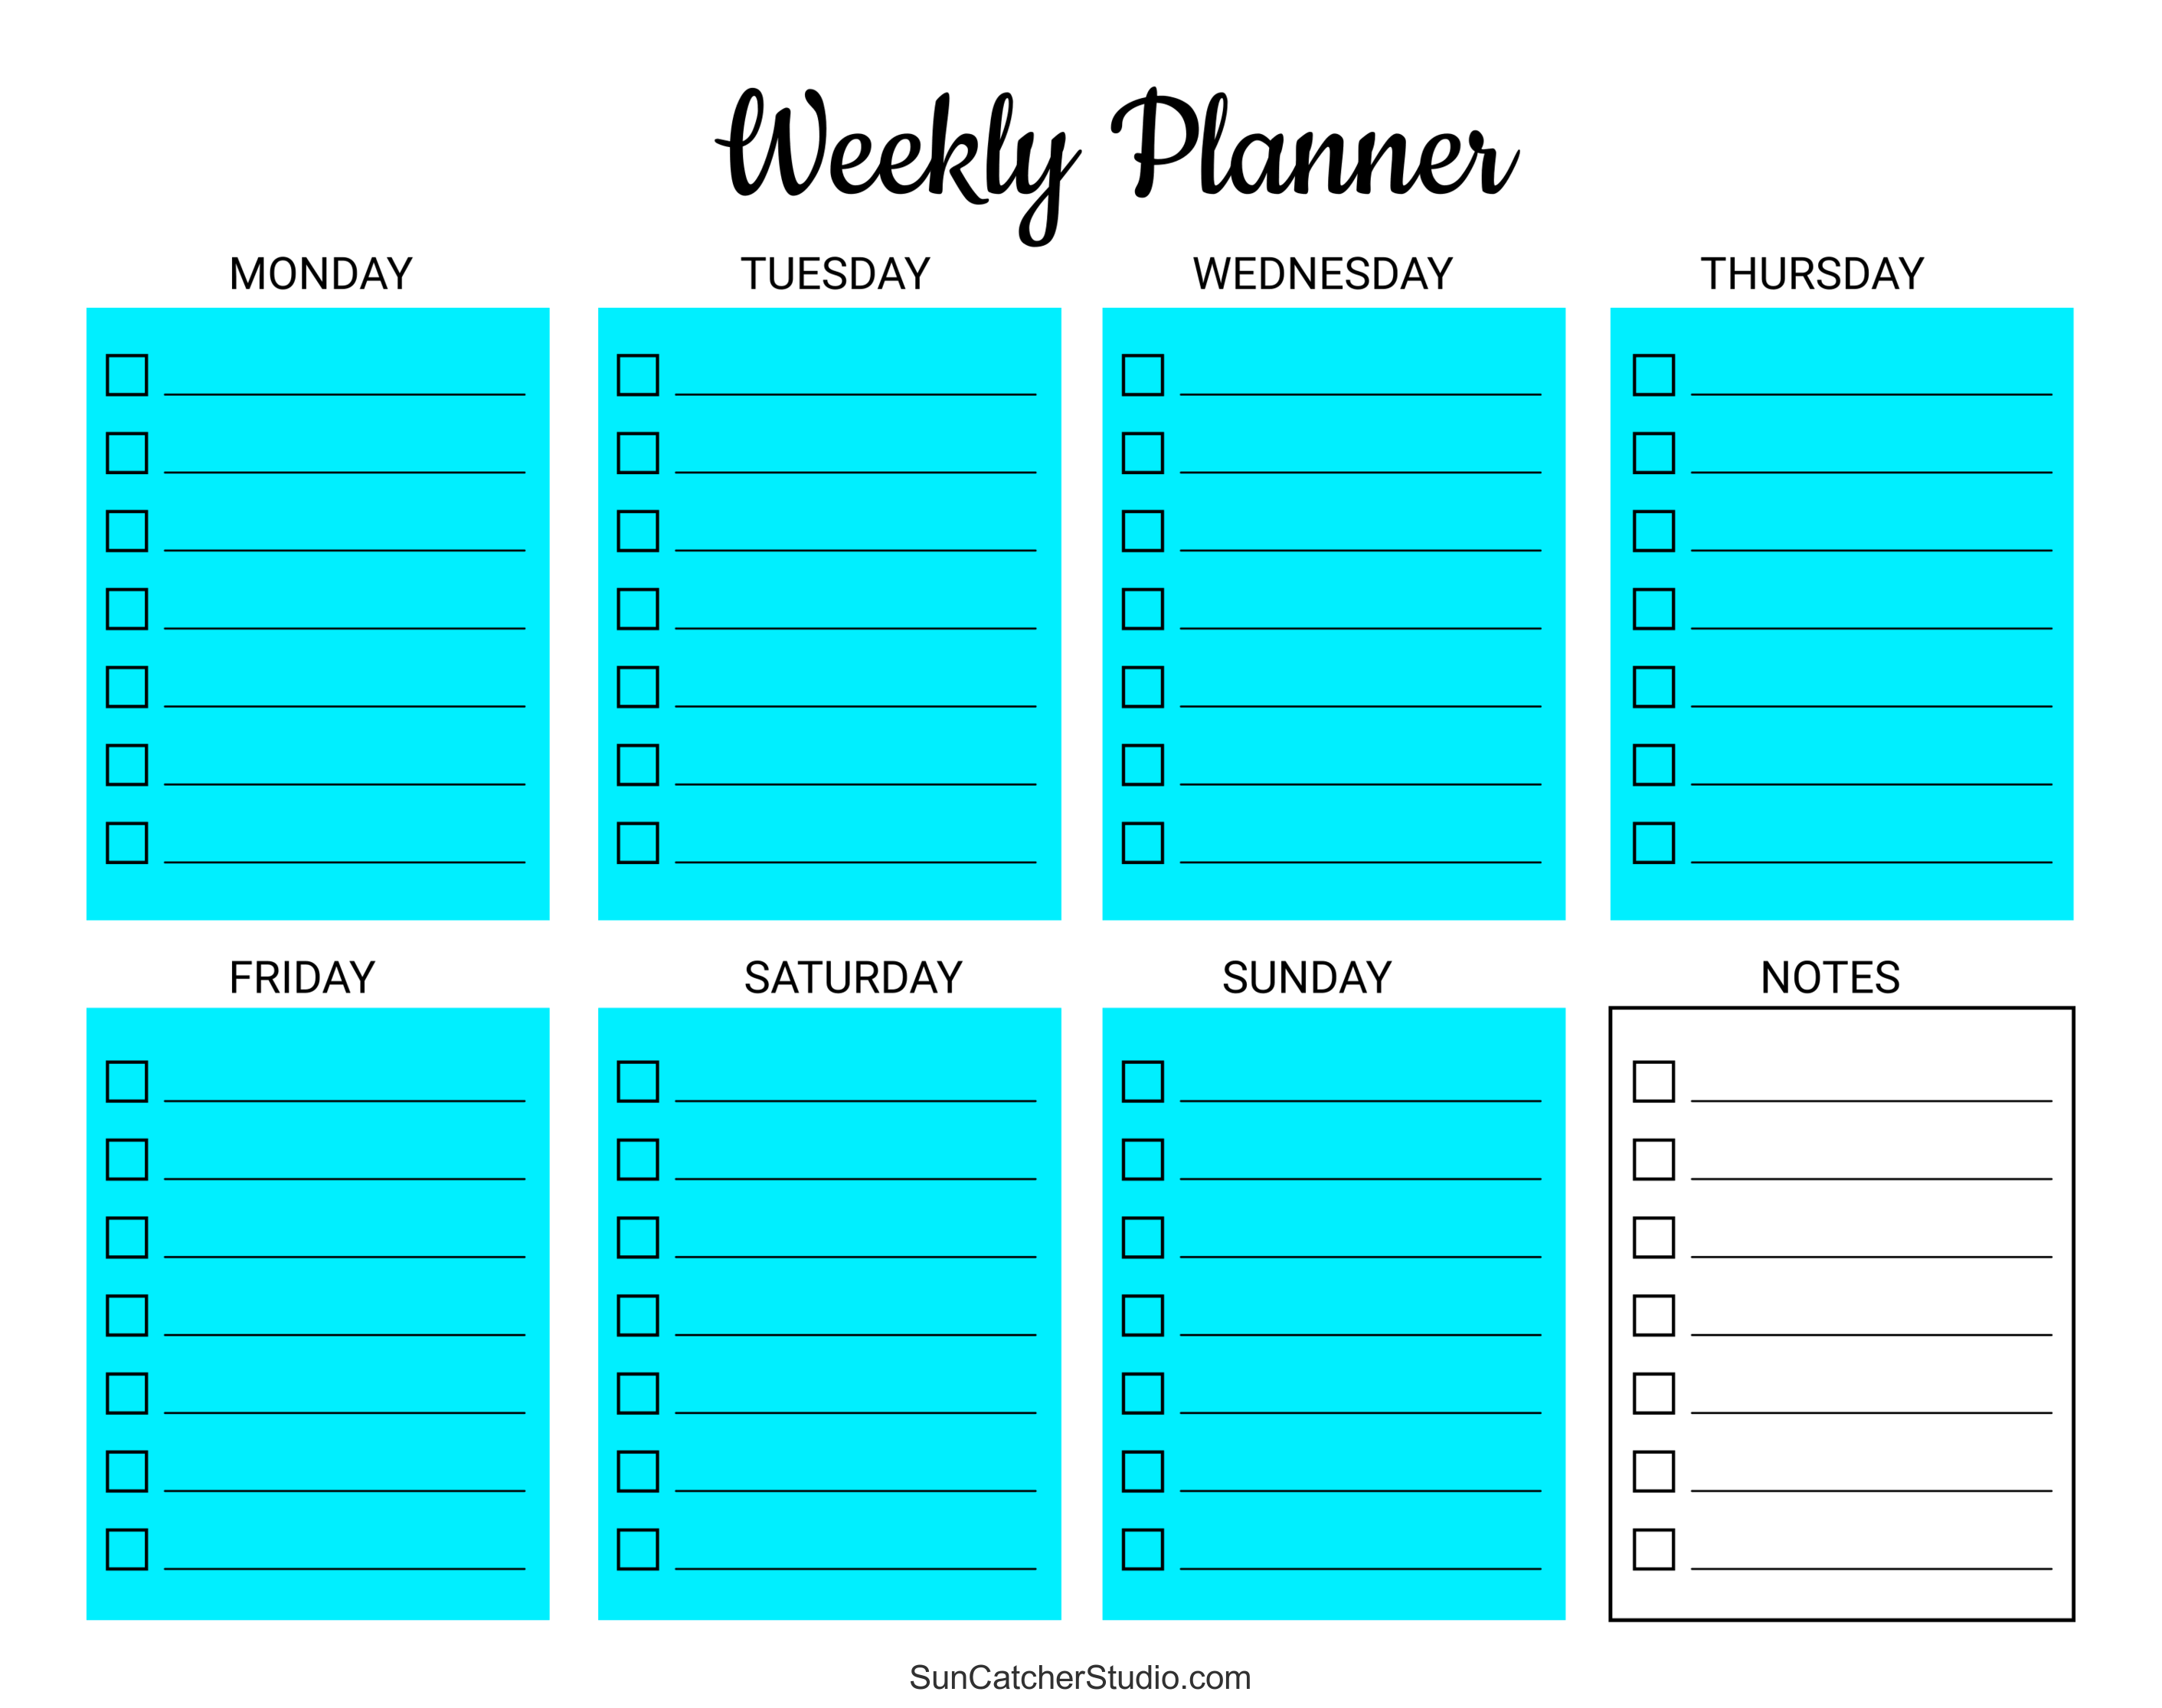 Weekly Planner Template - 24+ Free PDF, Word Documents Download